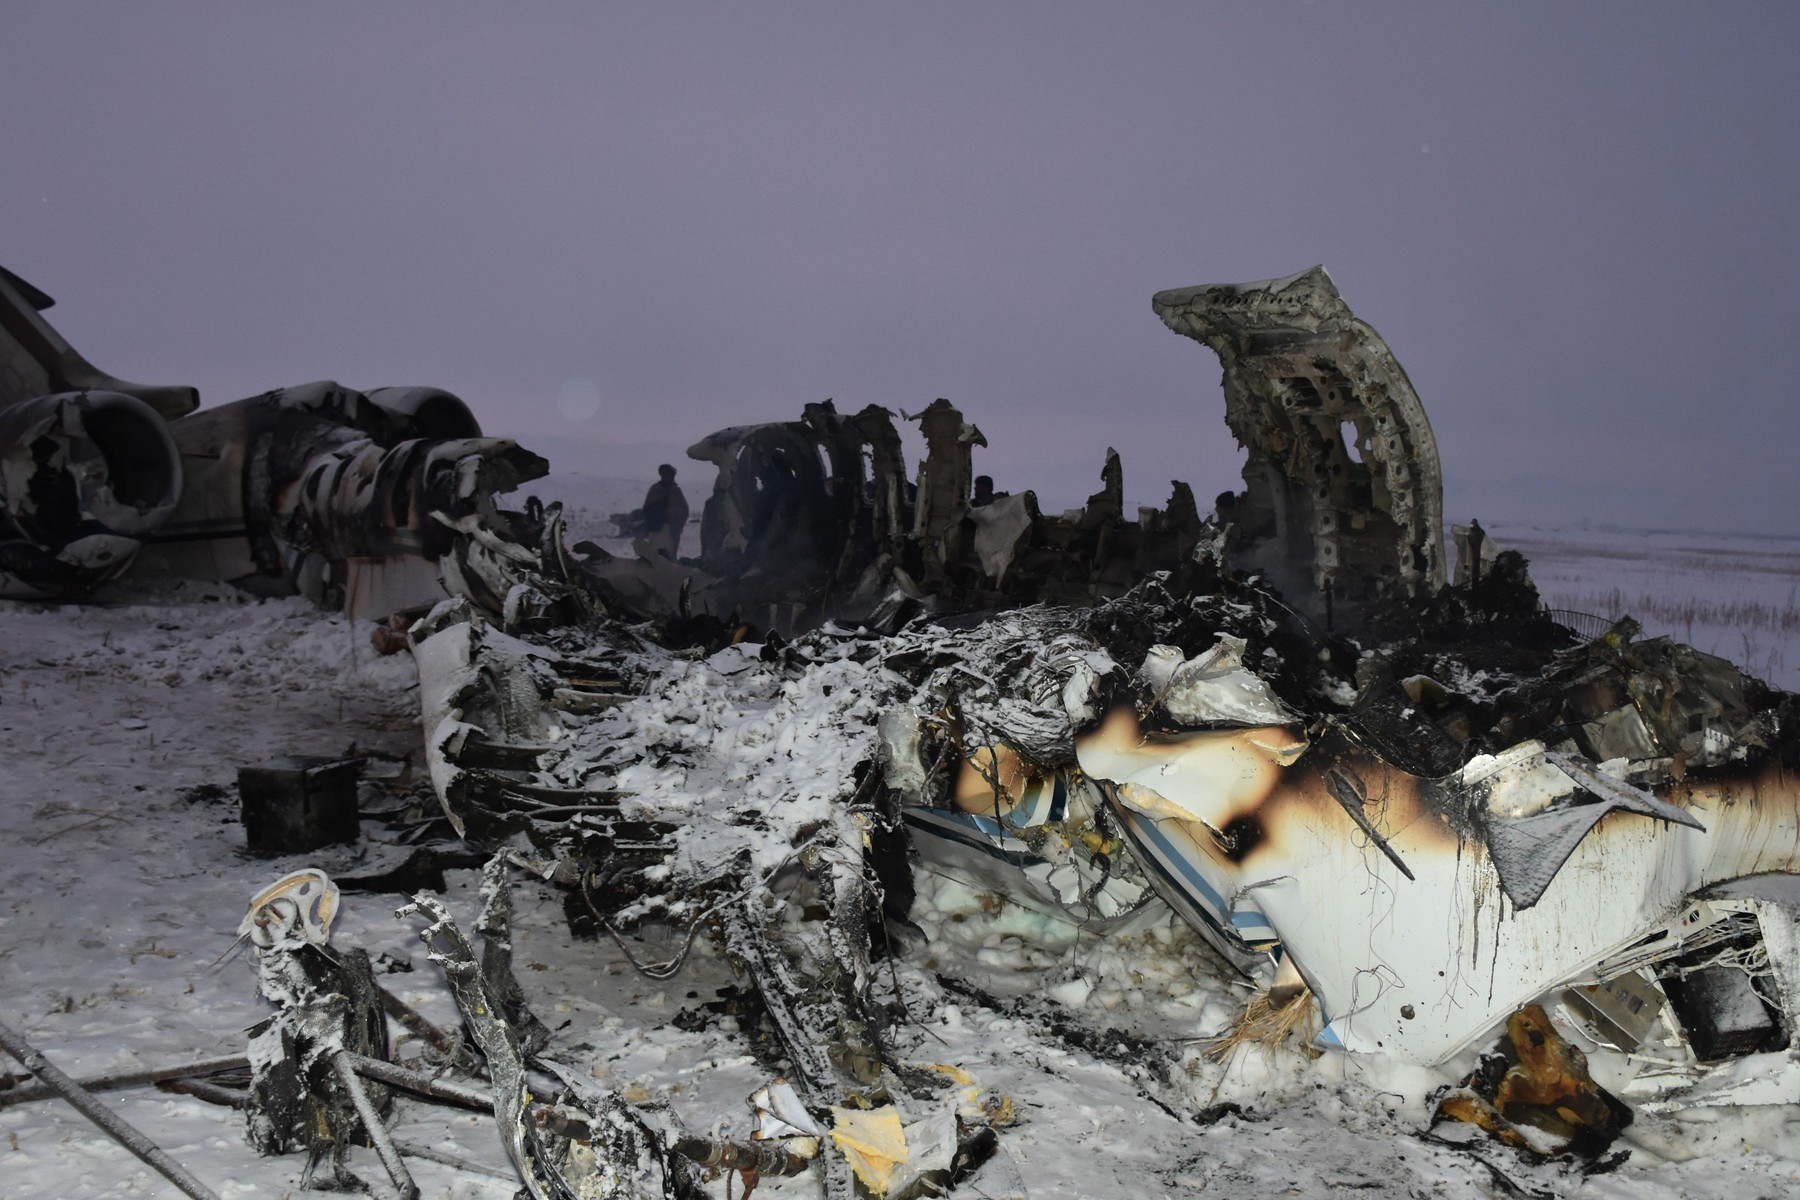 (200128) -- GHAZNI, Jan. 28, 2020 () -- Photo taken on Jan. 27, 2020 shows the wreckage of the crashed plane in Deh Yak District of Ghazni Province, Afghanistan. The Afghan Taliban claimed Monday that its fighters shot down a U.S. aircraft in the country's eastern Ghazni province, while the U.S. military said there are 